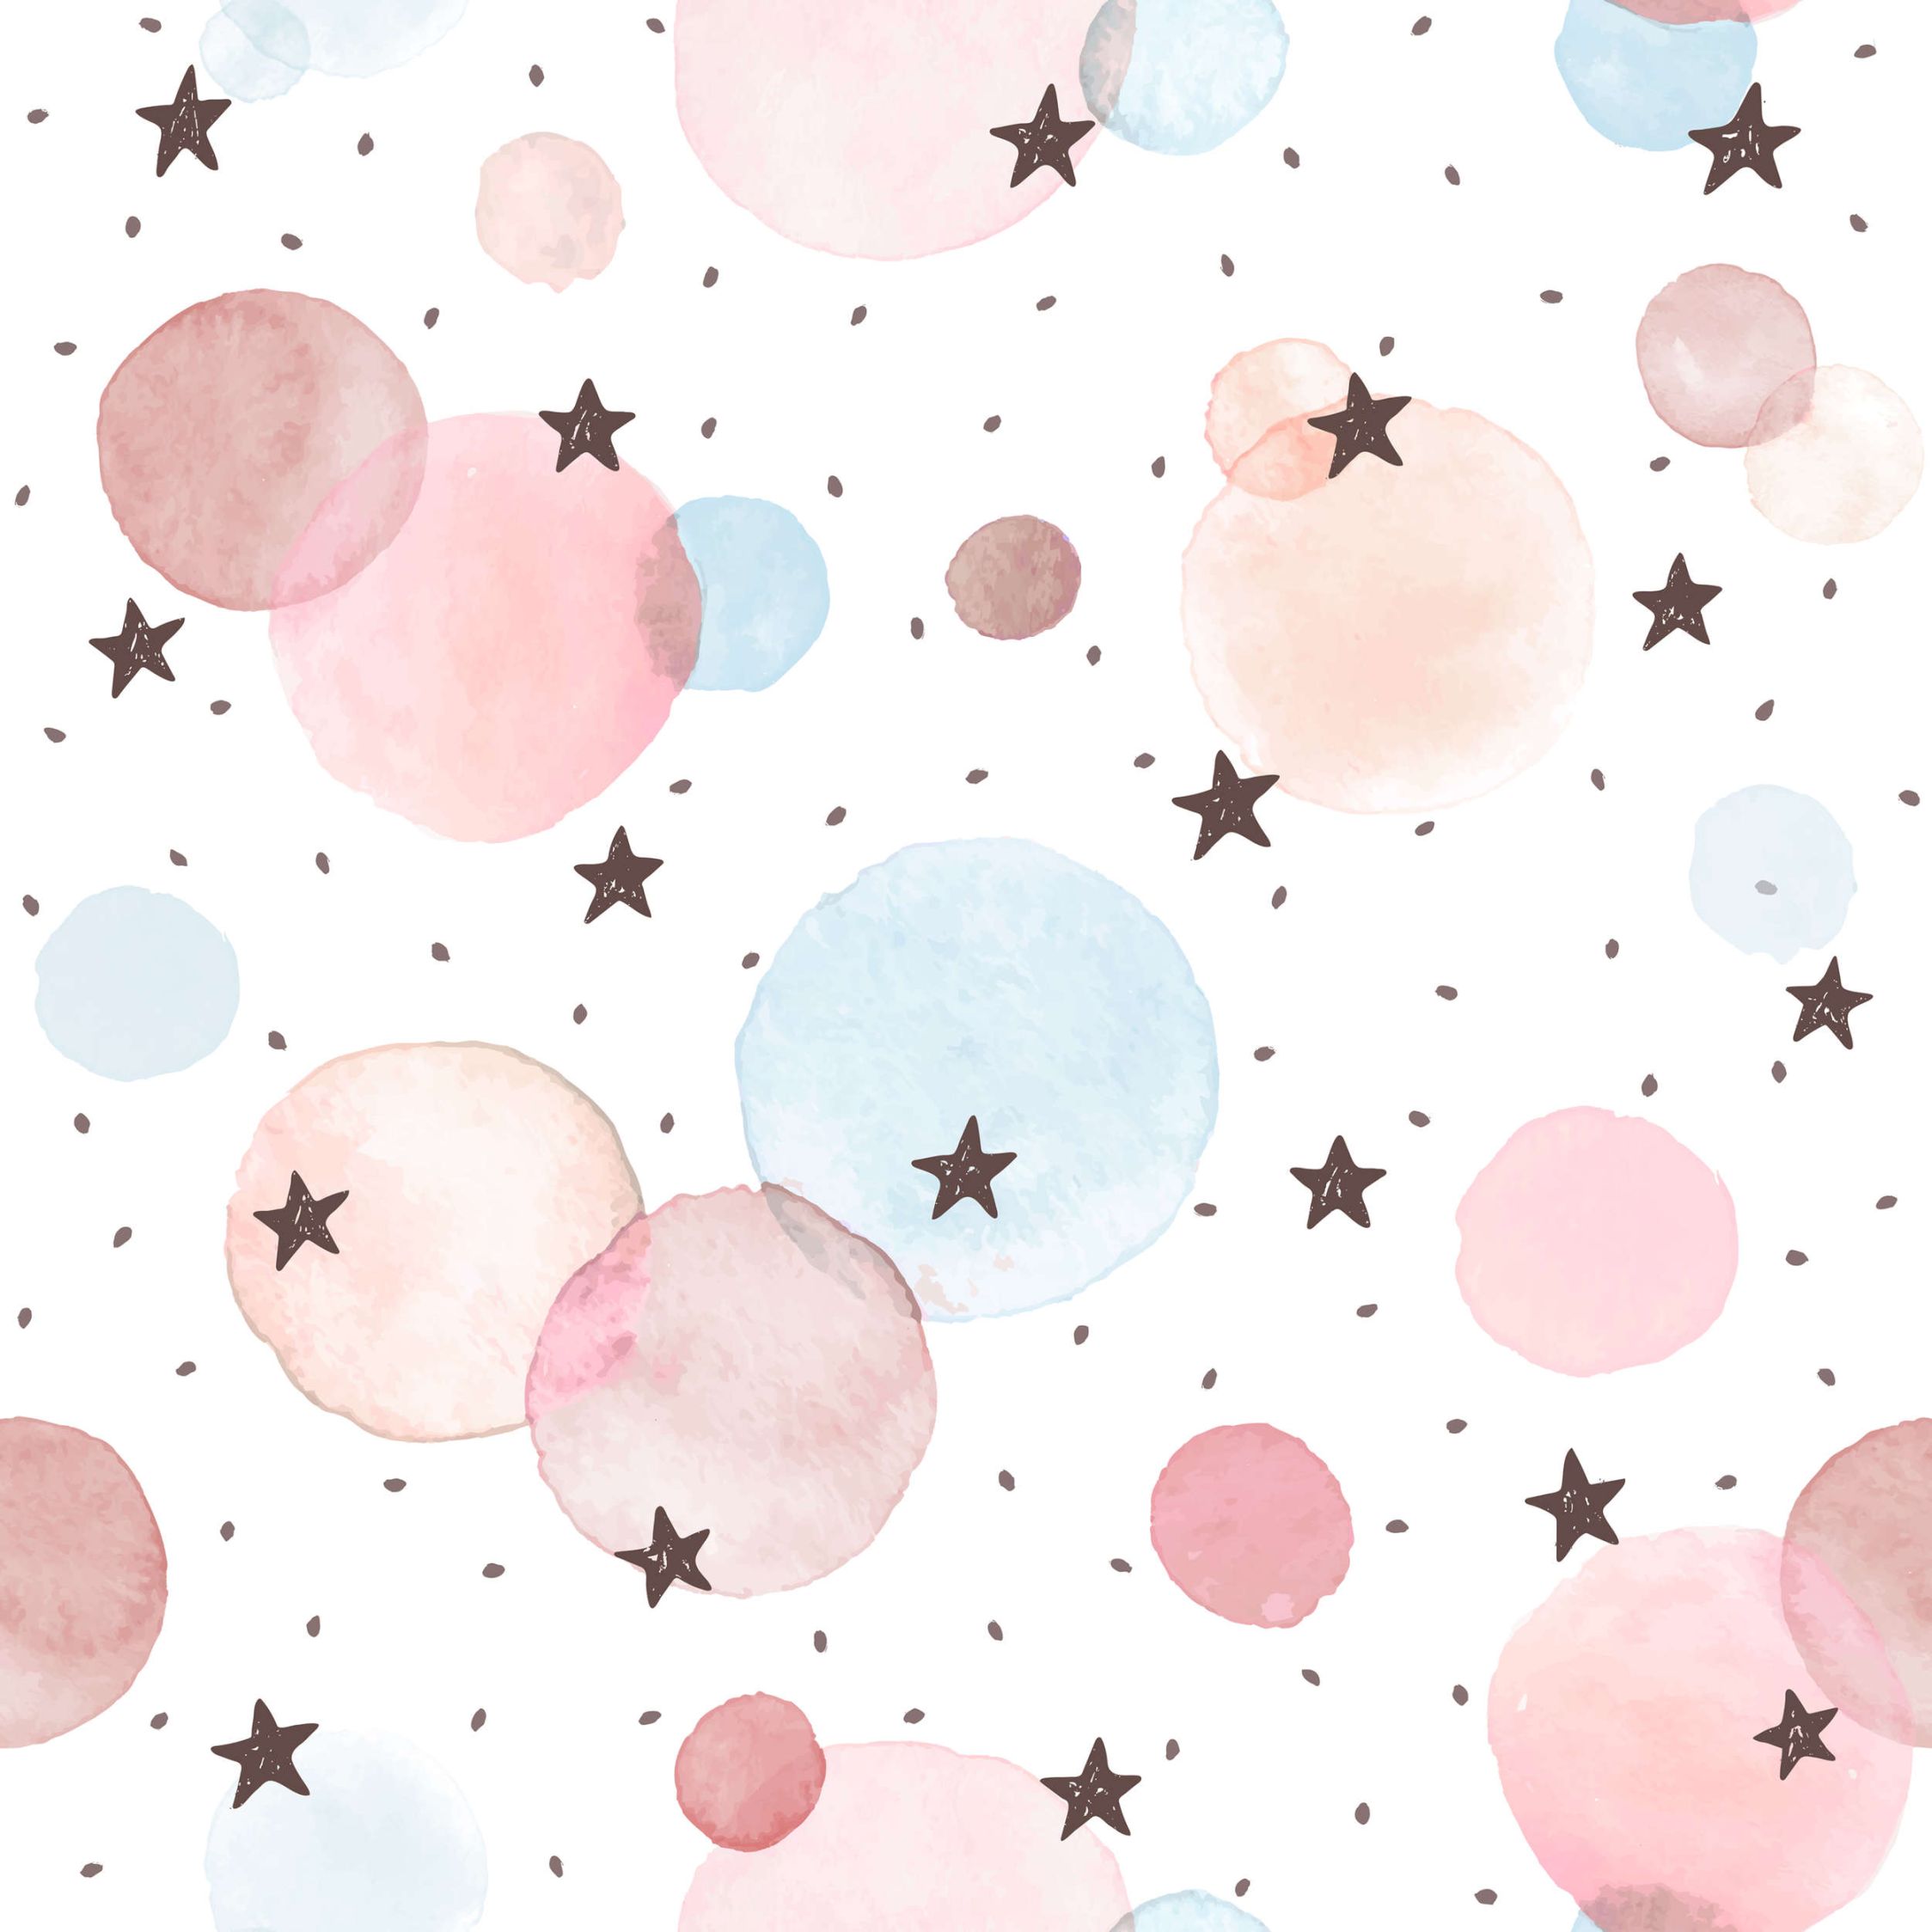             Photo wallpaper for children's room with stars, dots and circles - Smooth & pearlescent fleece
        